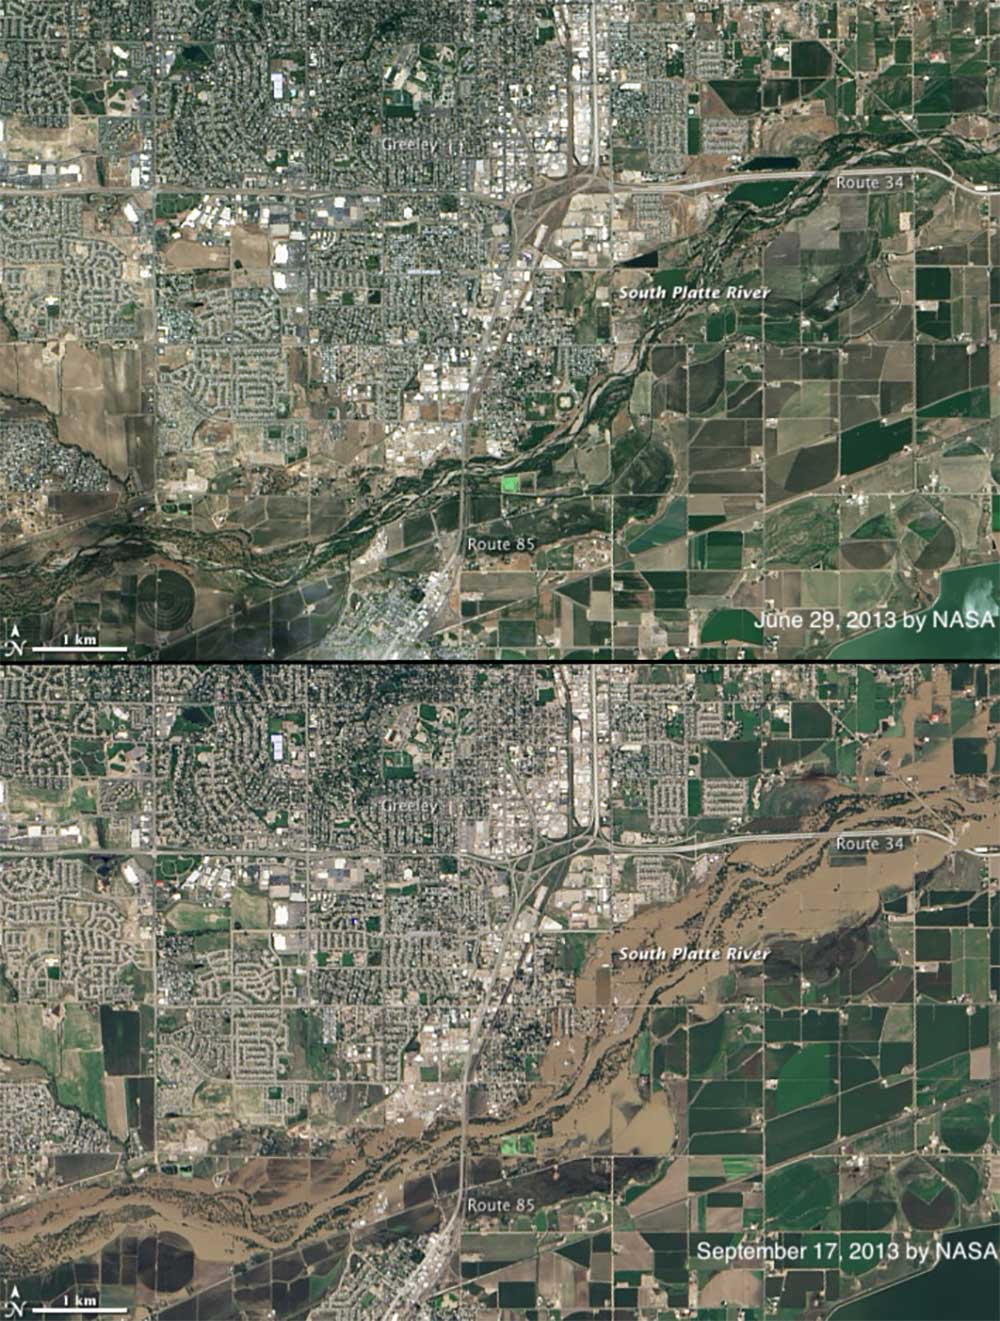 Two satellite images showing the before and after effects of flooding in 2013 near Greely, Colorado.